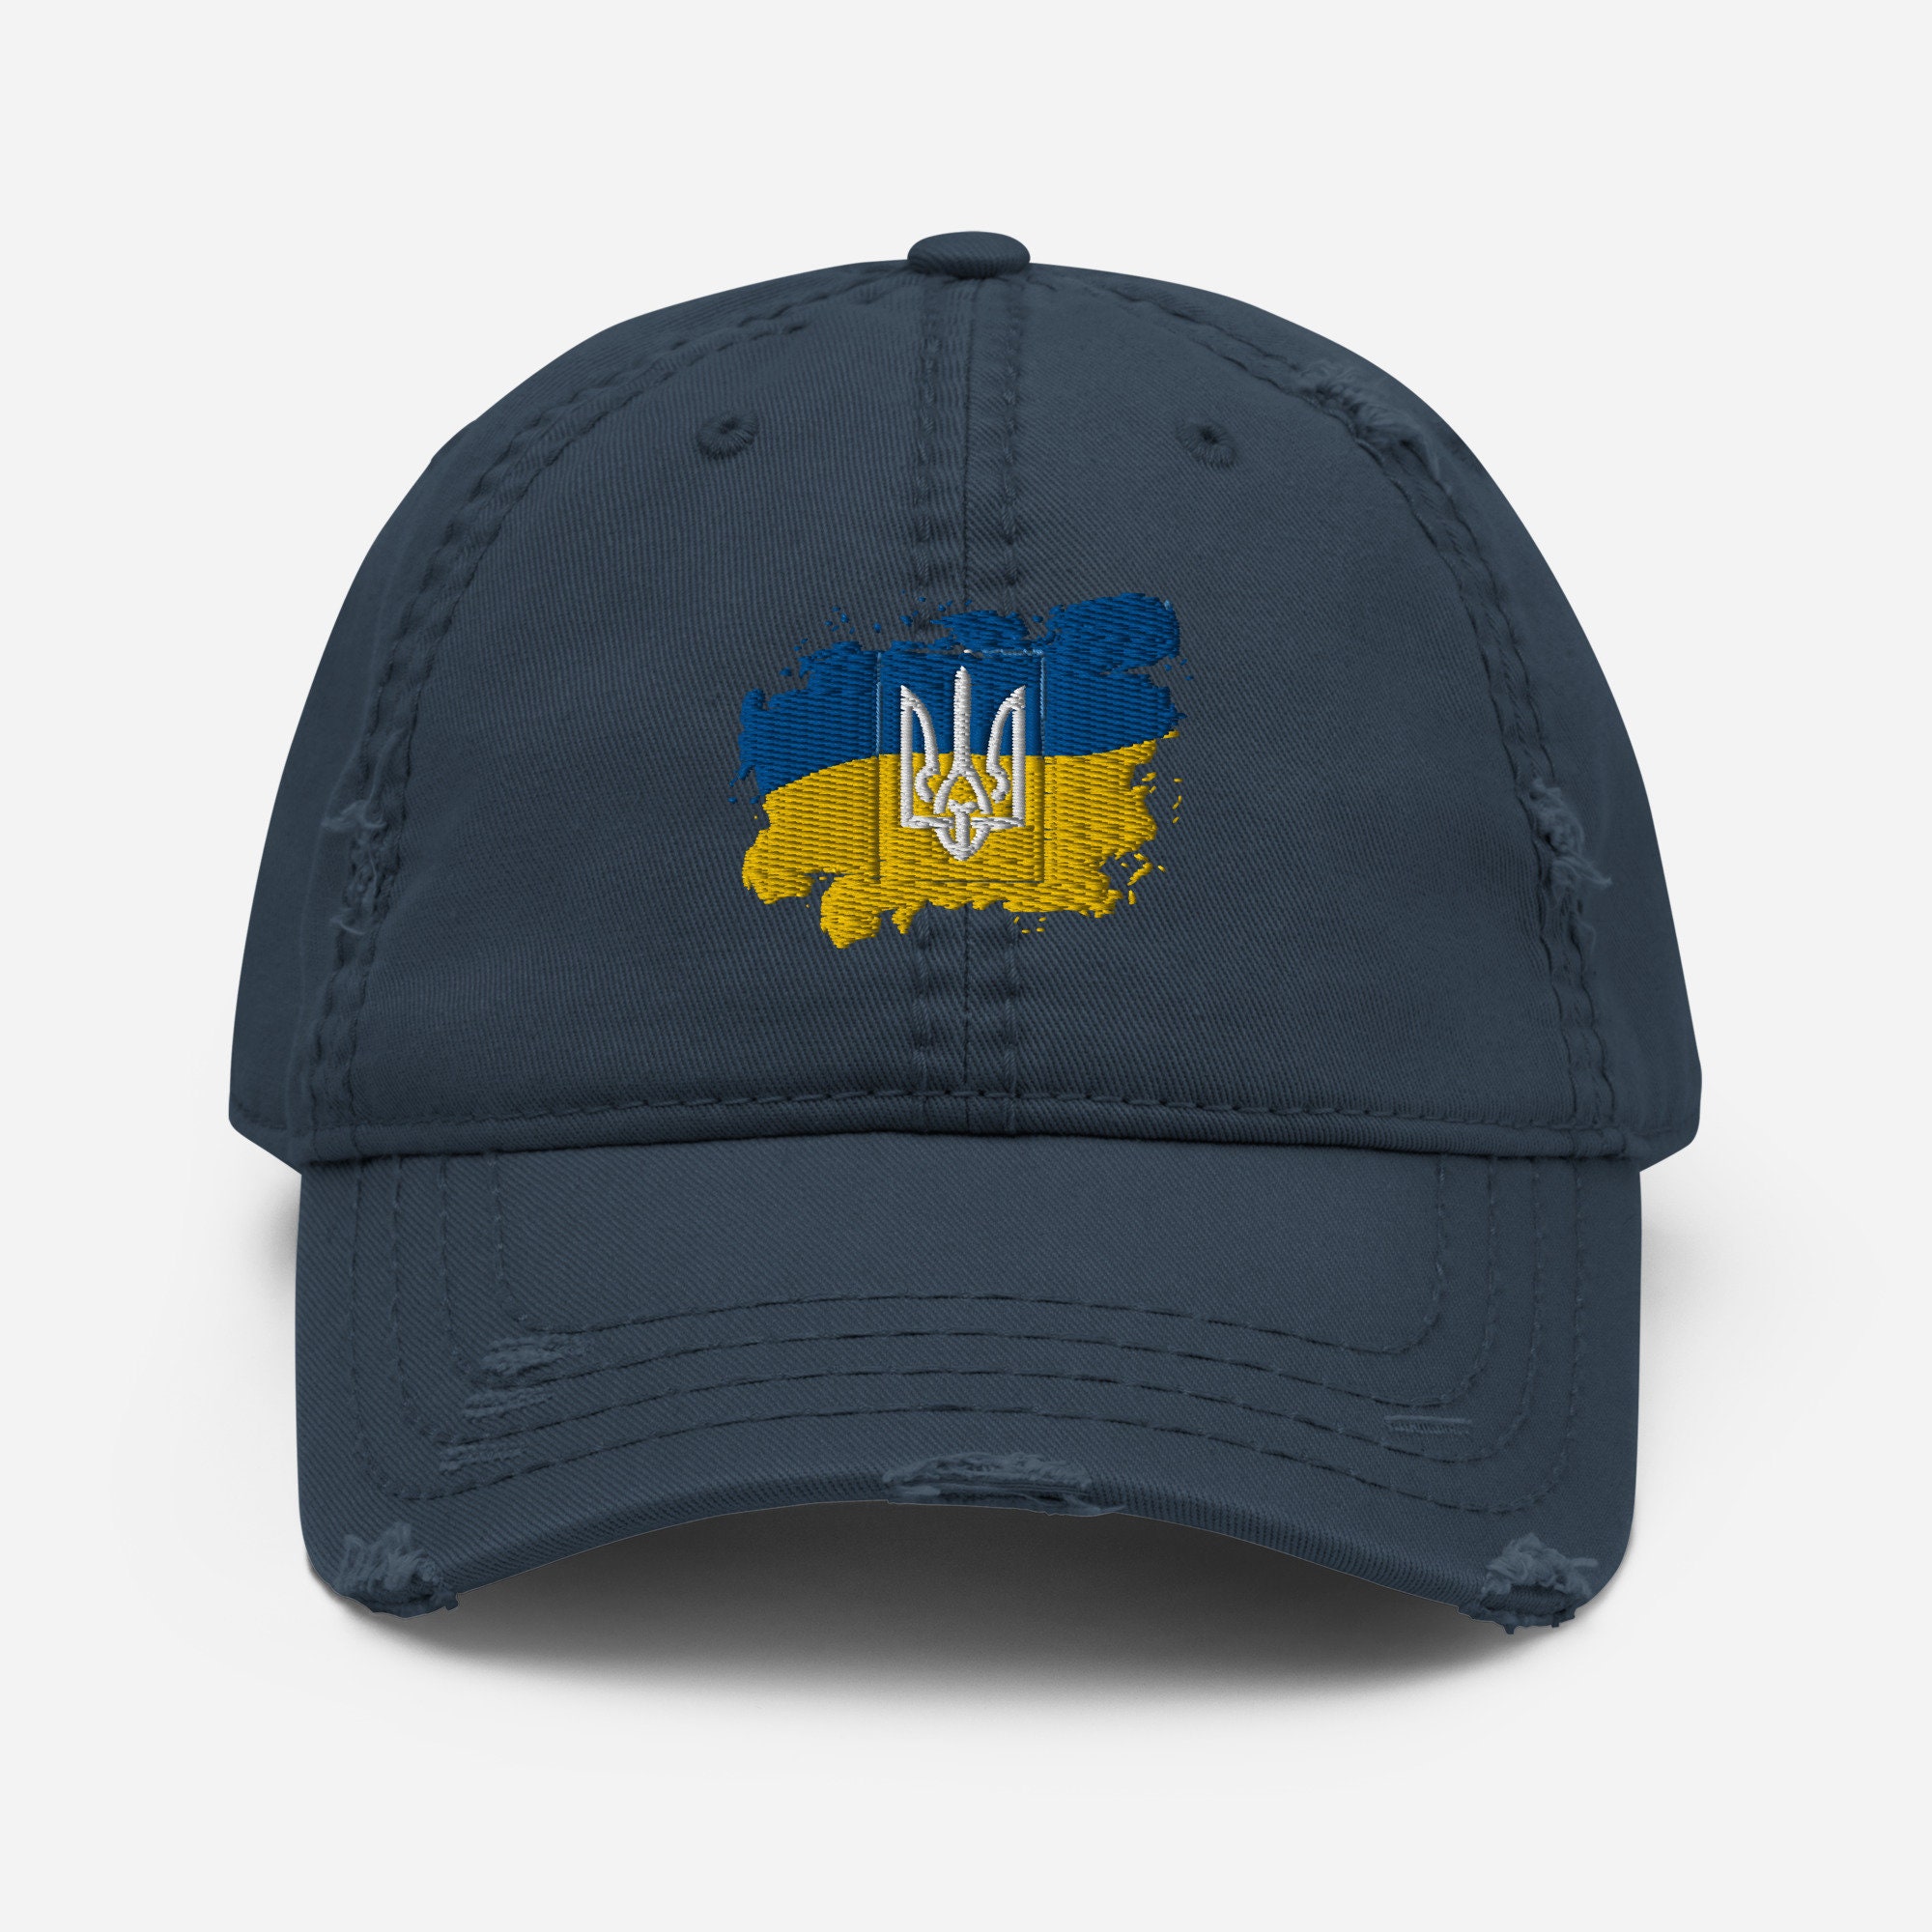 Support Ukraine Protest War In Baseball Cap Father's Day Embroidered Hat